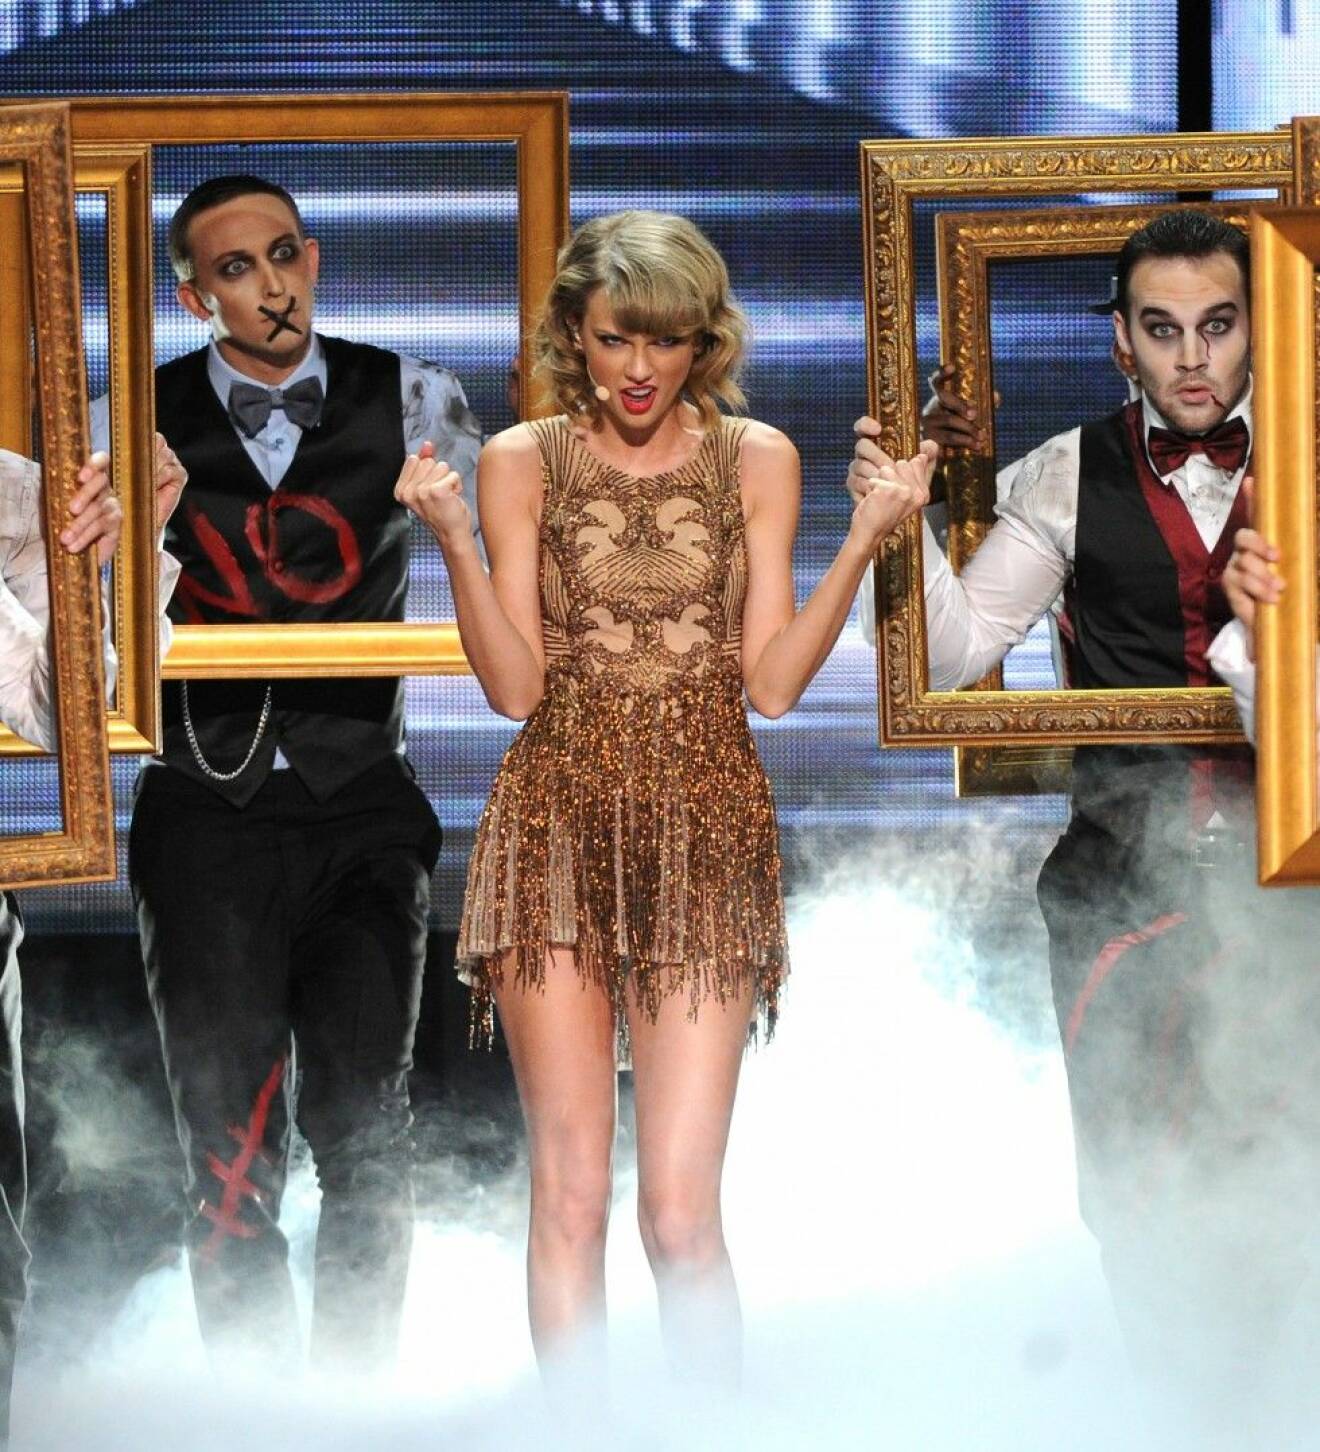 Taylor Swift turns up the heat as she performs at the 2014 American Music Awards